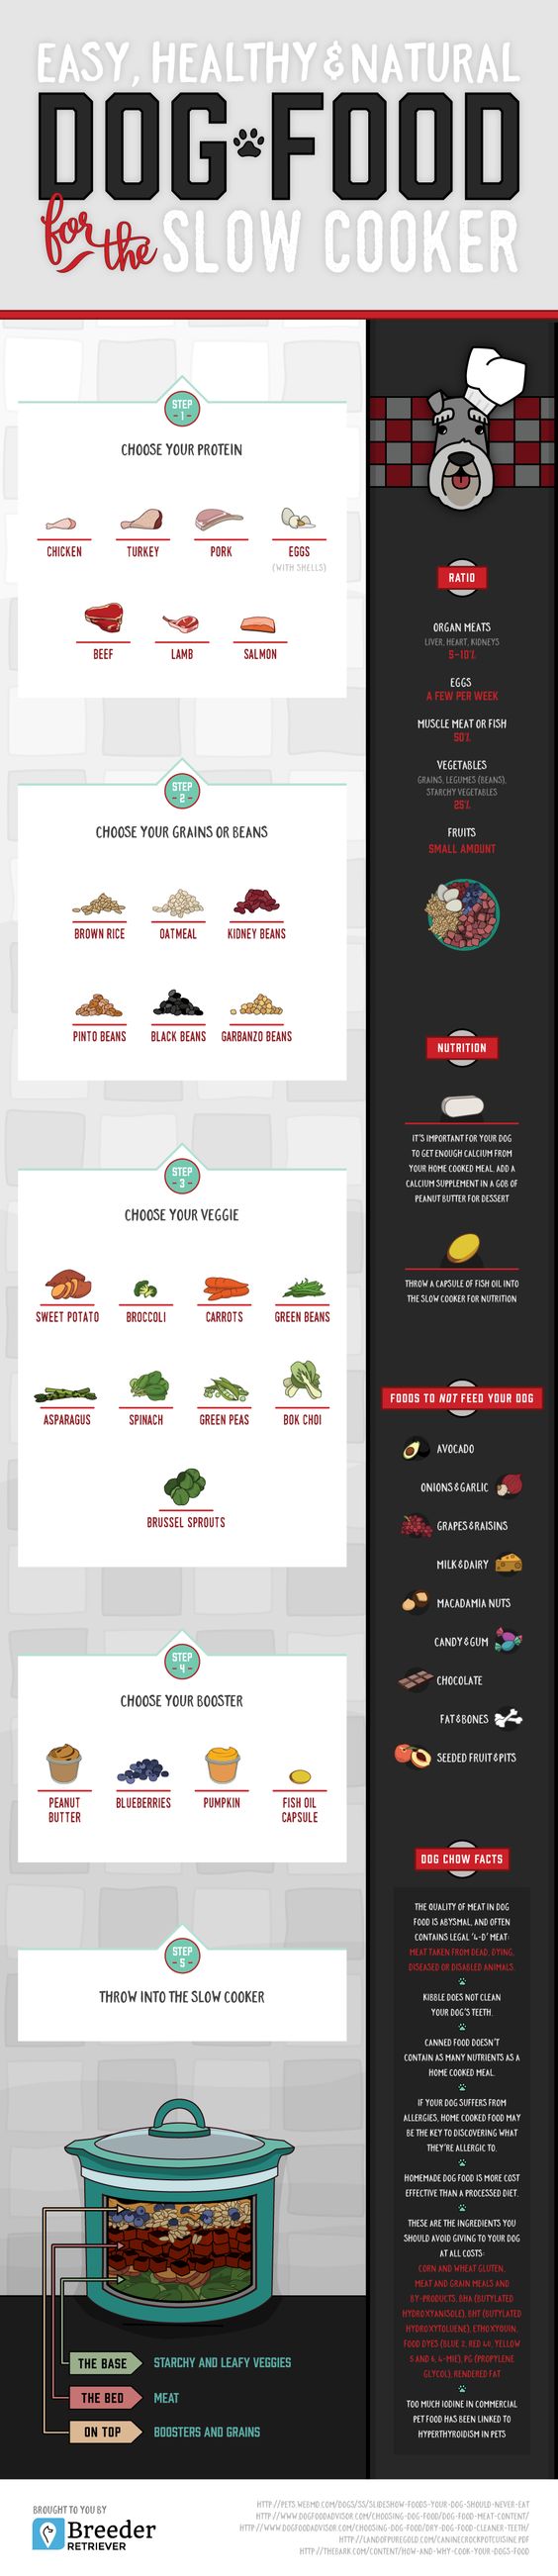 Set Tails Wagging With This Healthy Homemade Dog Food Infographic!